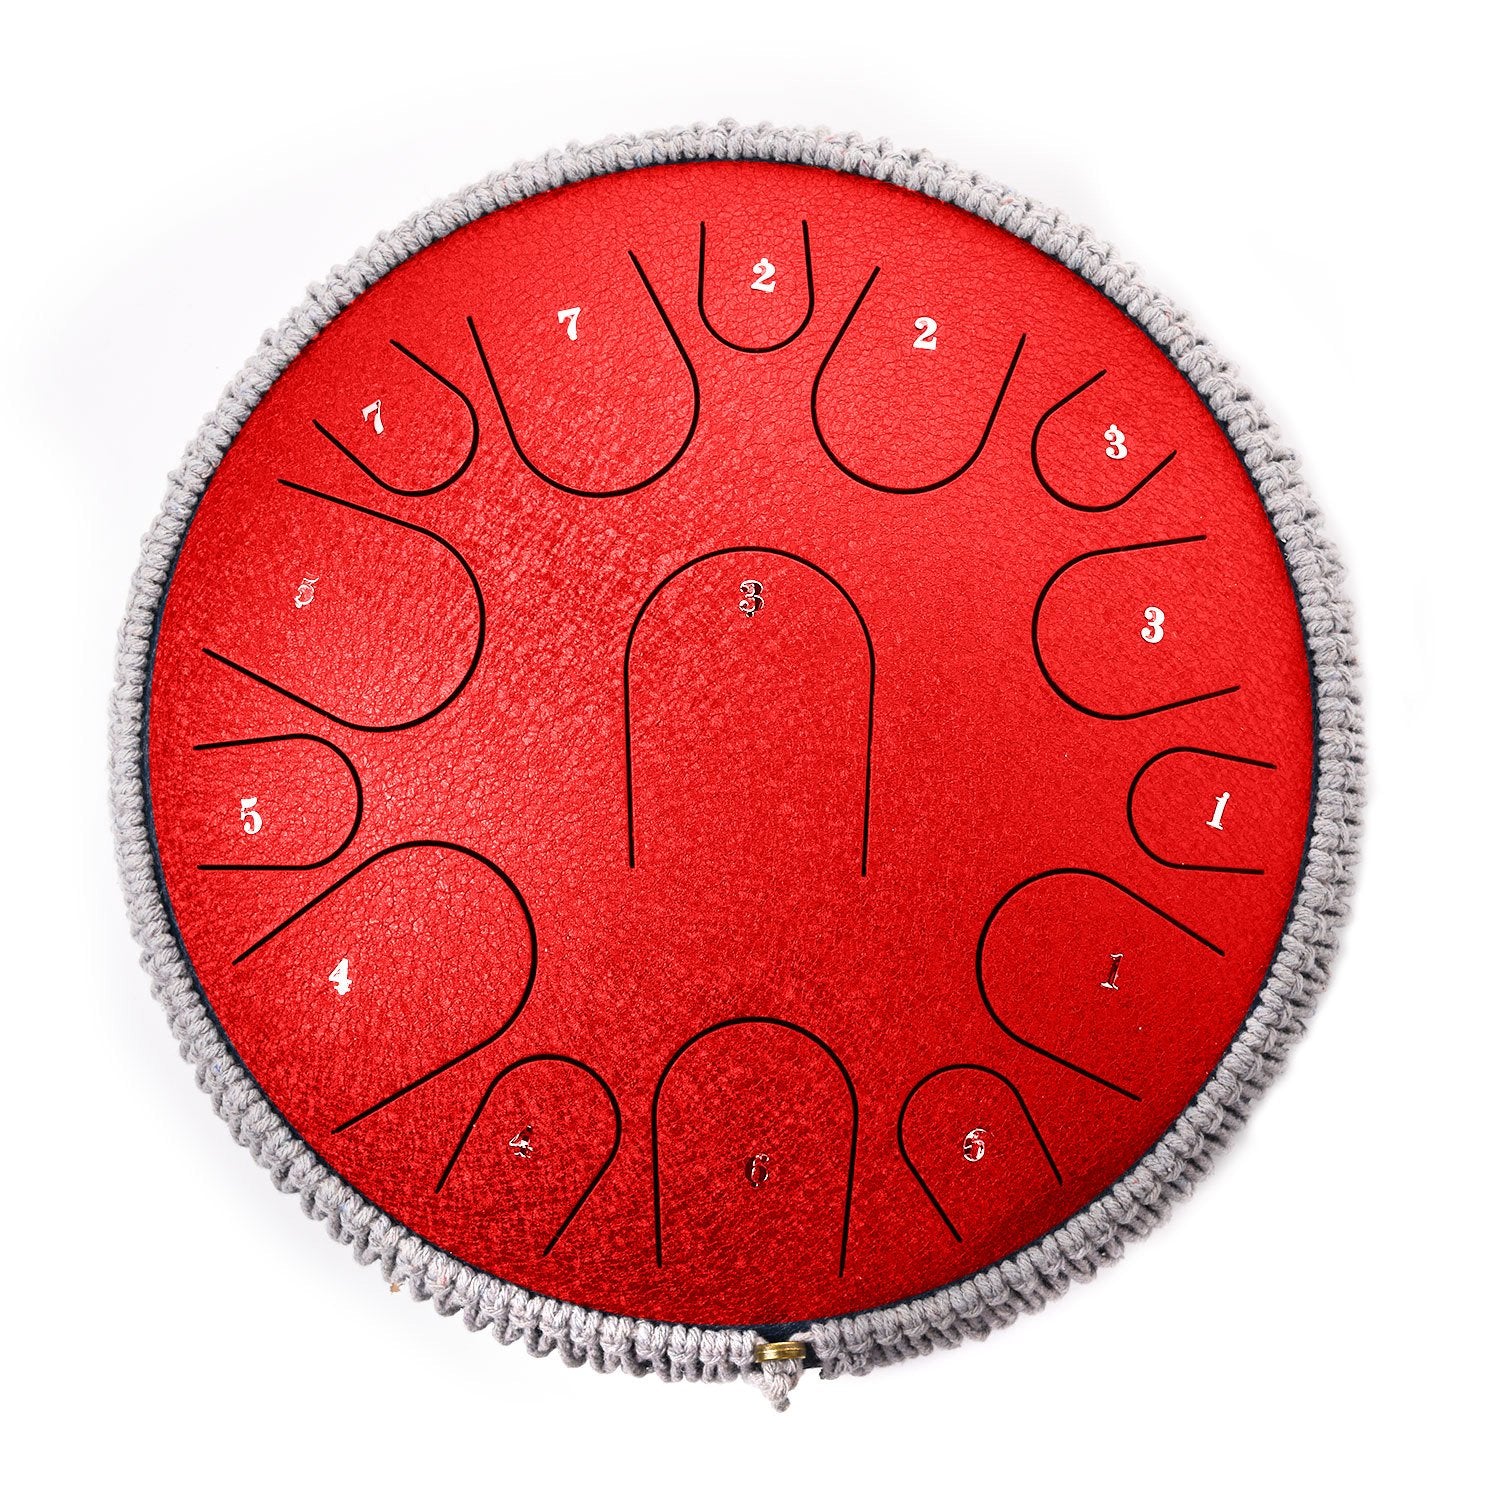 New red Steel Tongue Drum for Mind Healing Yoga